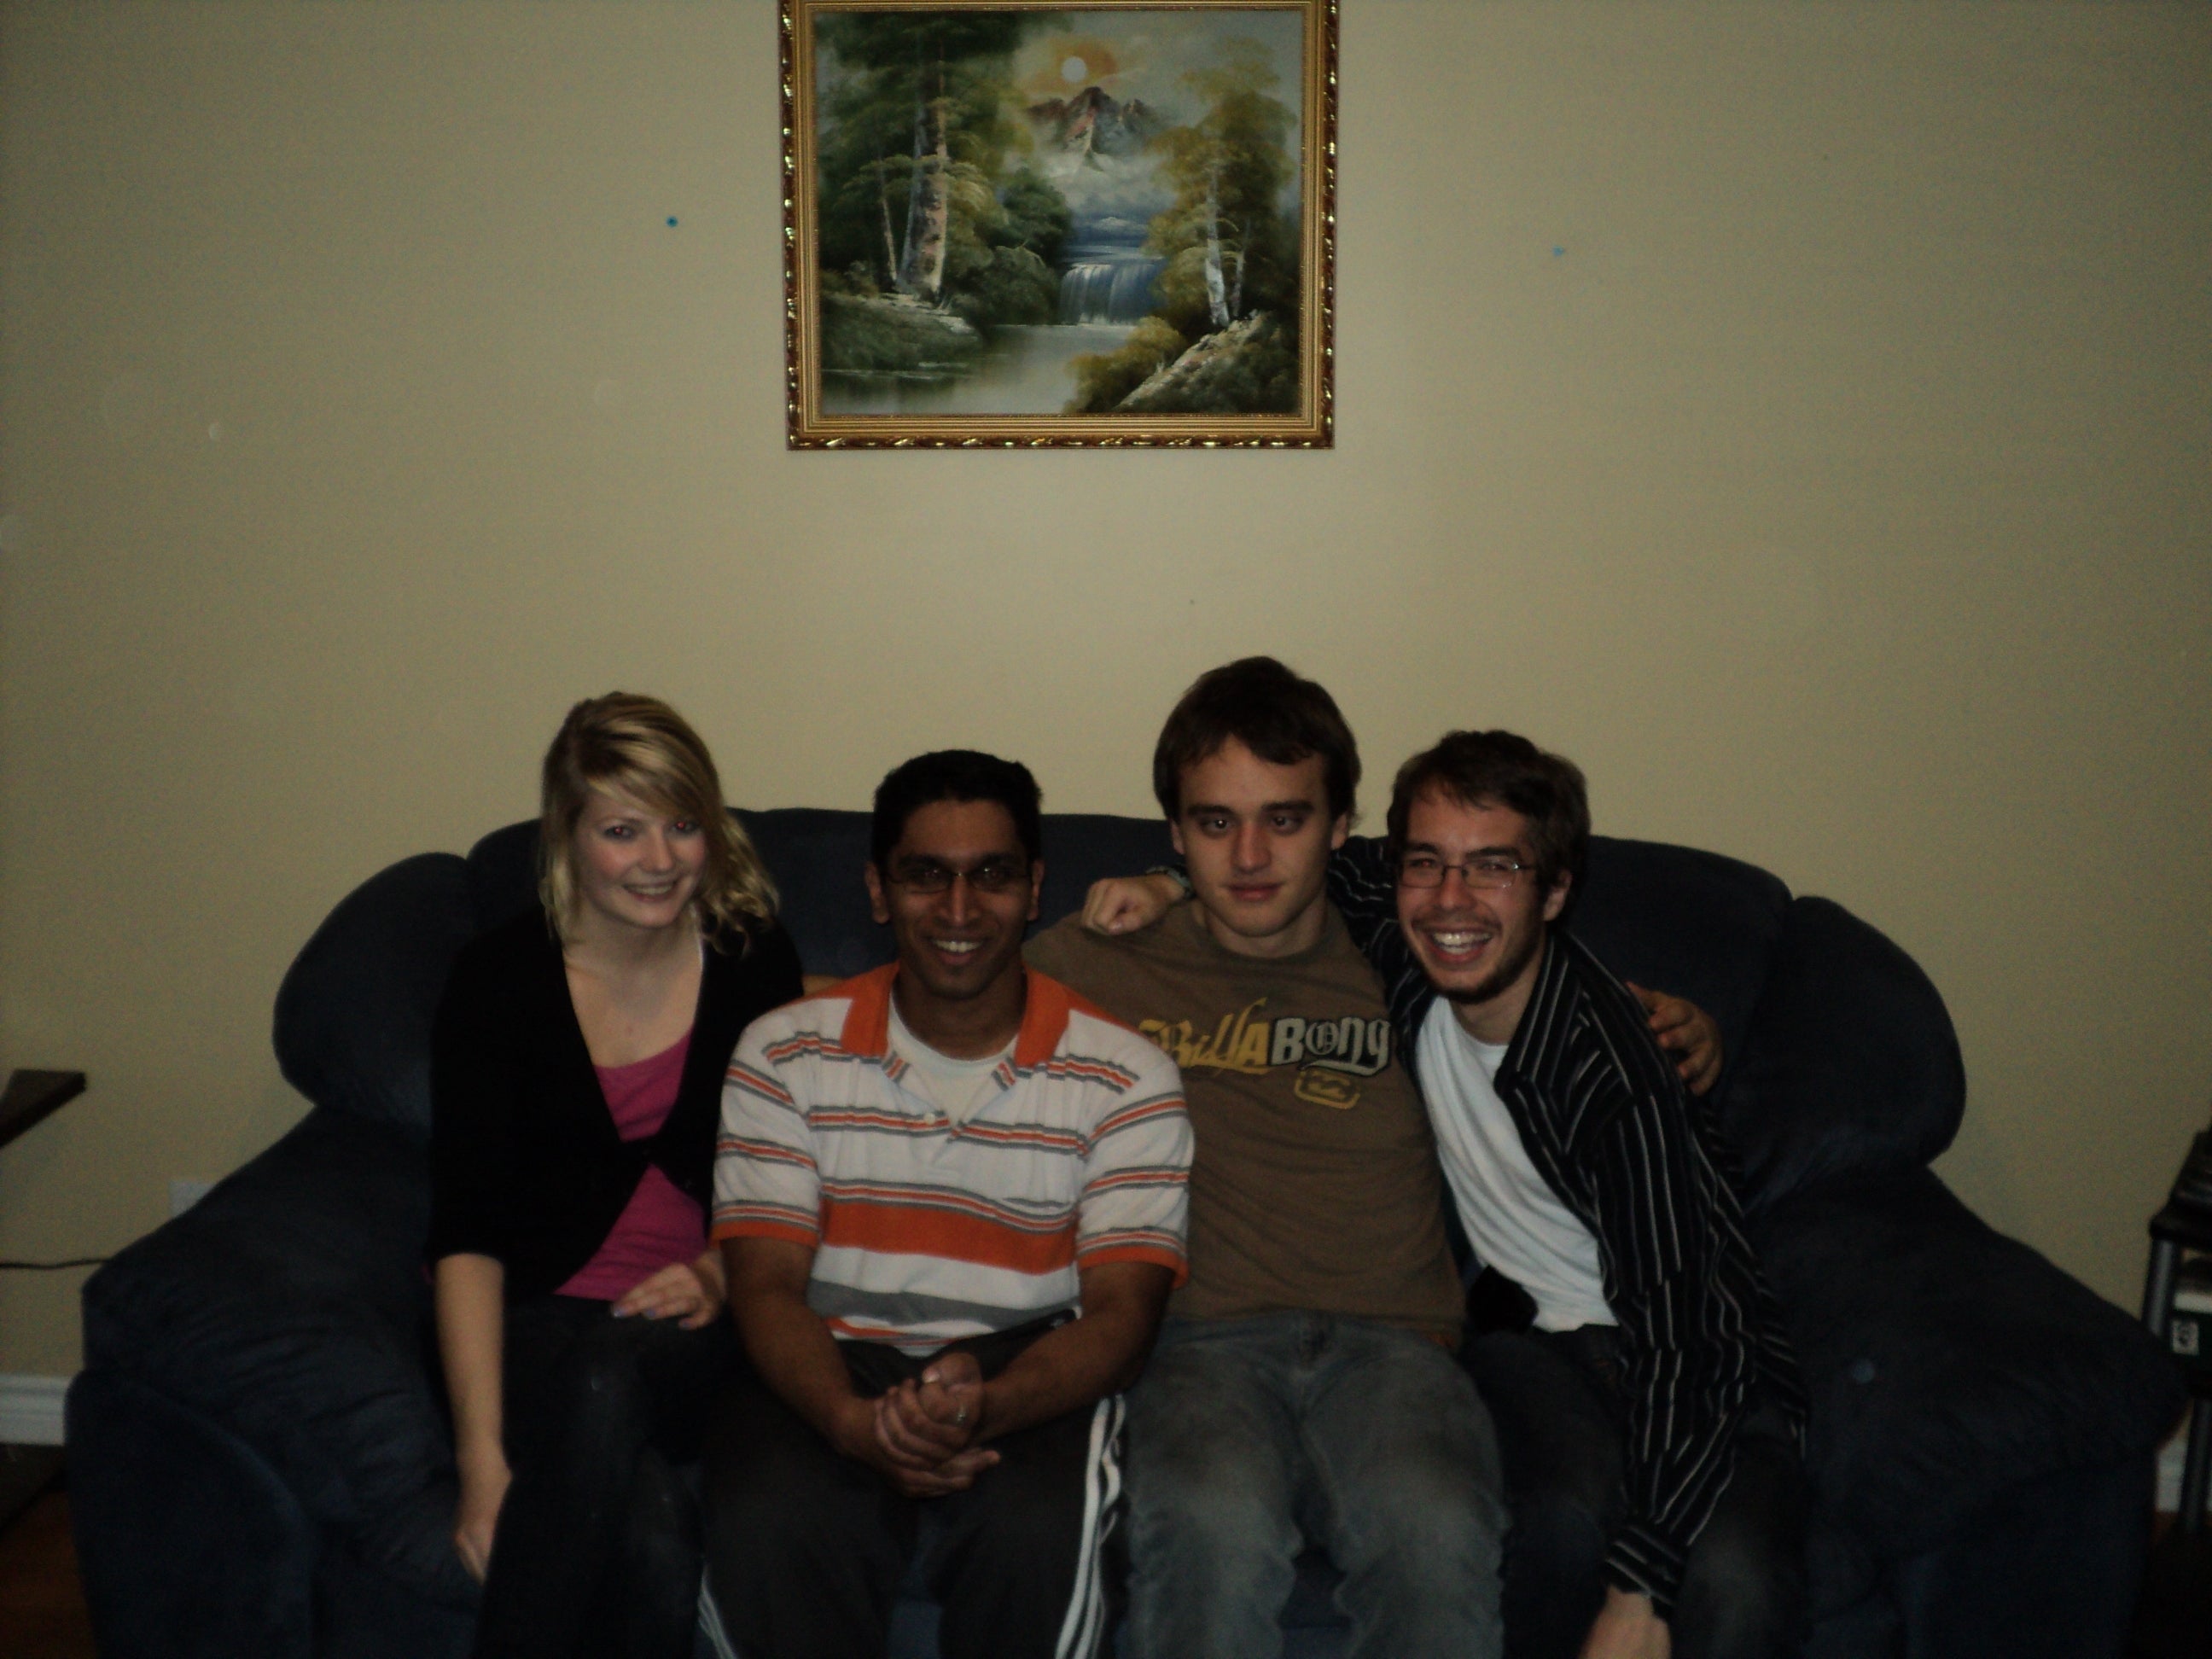 Laura Bell, Sharath Sundar, Barrett Lafortune, and Eric Kennedy posing together on a couch under a painting. 